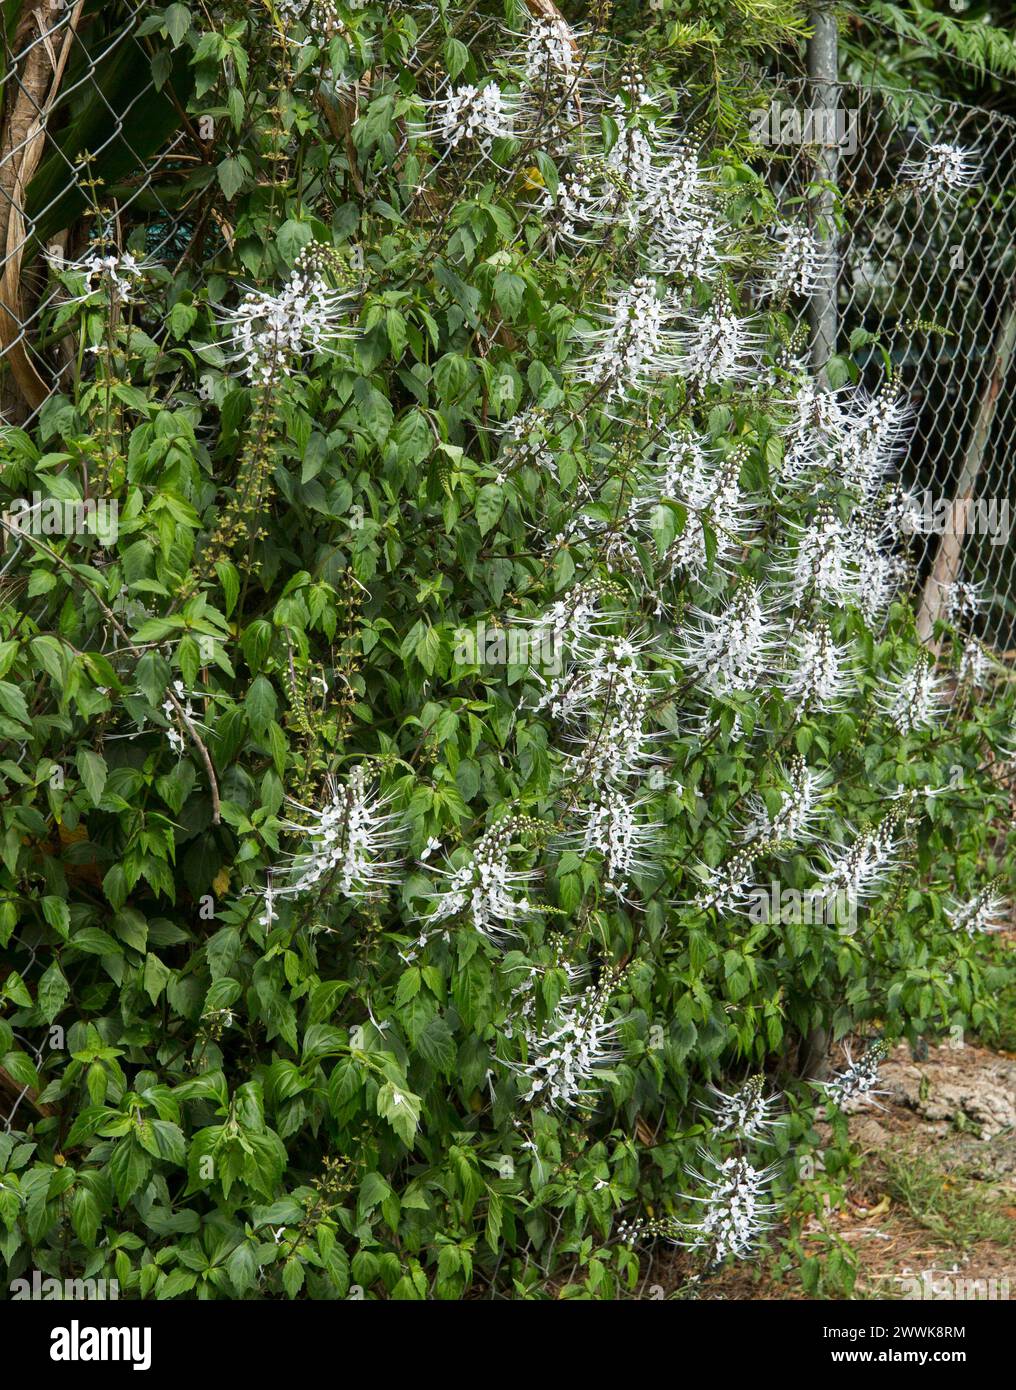 Australian native perennial plant, Orthosiphon aristatus, Cat's Whiskers, with masses of white flowers, growing over a high fence in a garden Stock Photo